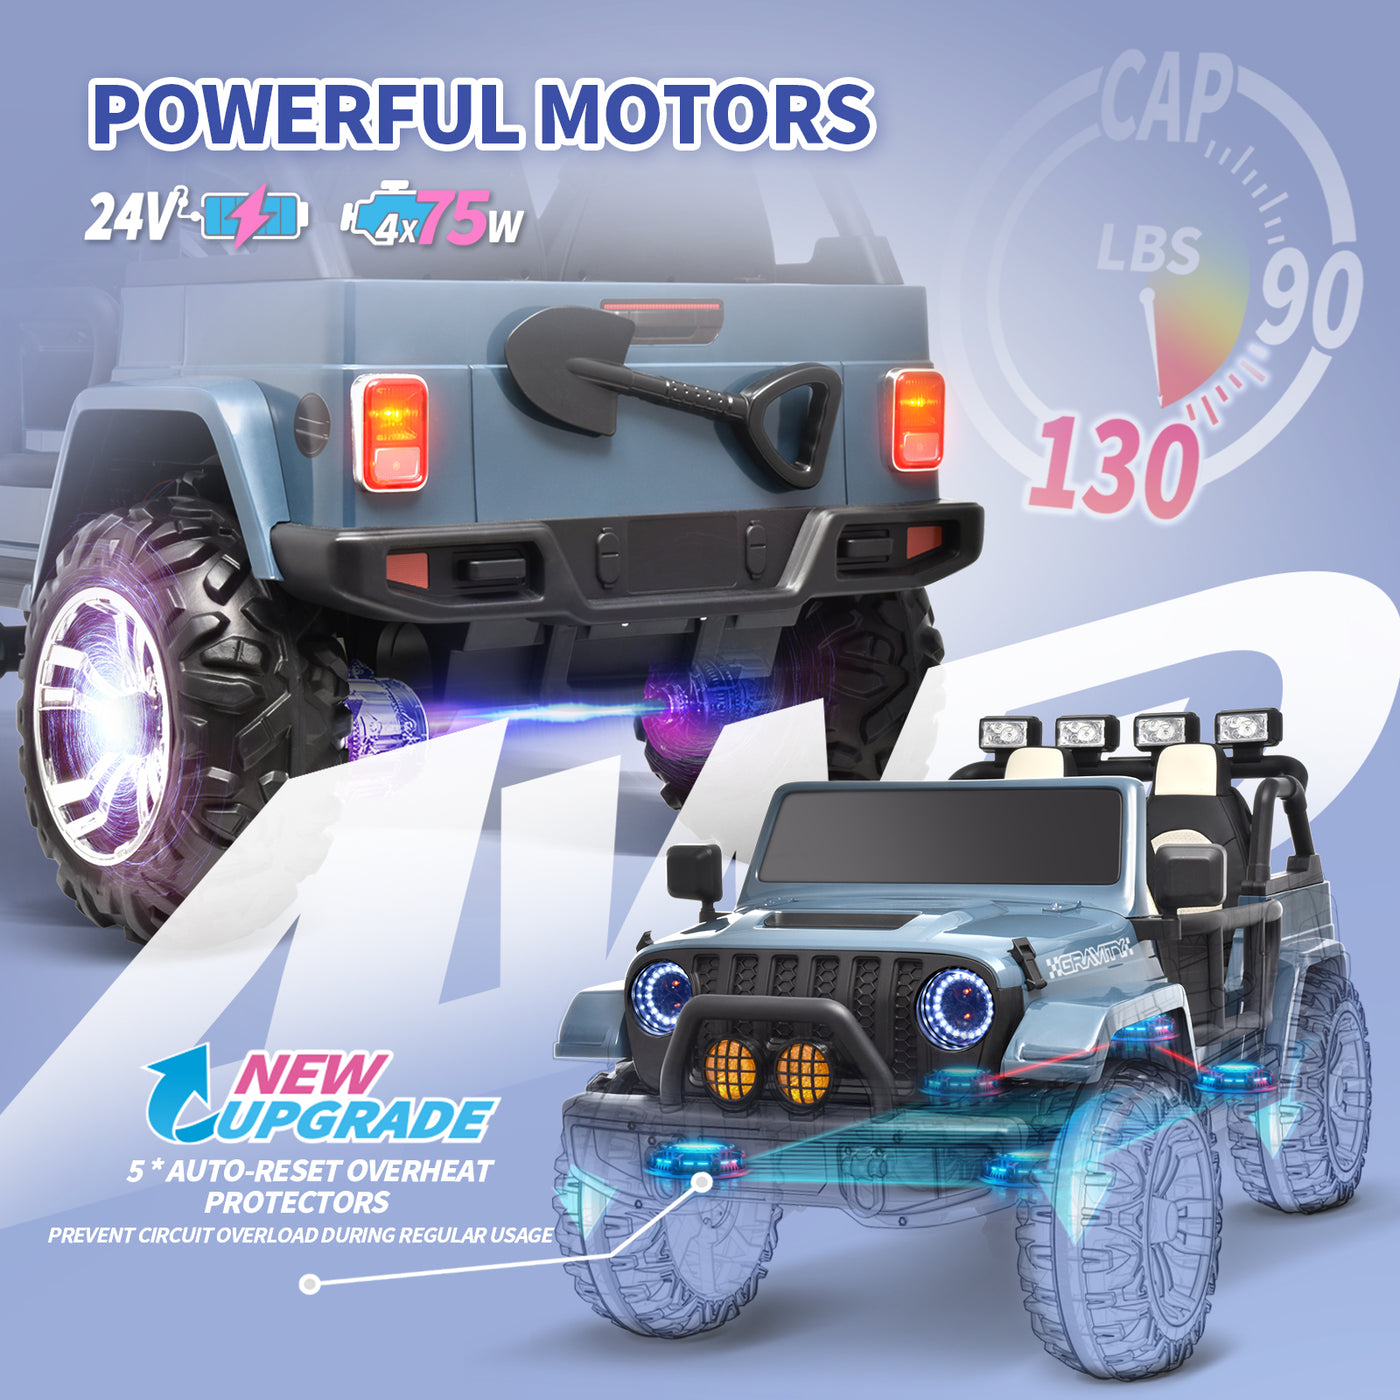 Joywhale 24V 2 Seater Kids Ride on Truck 4WD Easy-Drag Electric Car, with 4x75W Engine, Leather Seat, EVA Wheels, Soft Braking, Remote Control, Suspension &Free Car Cover, BW-609PRO